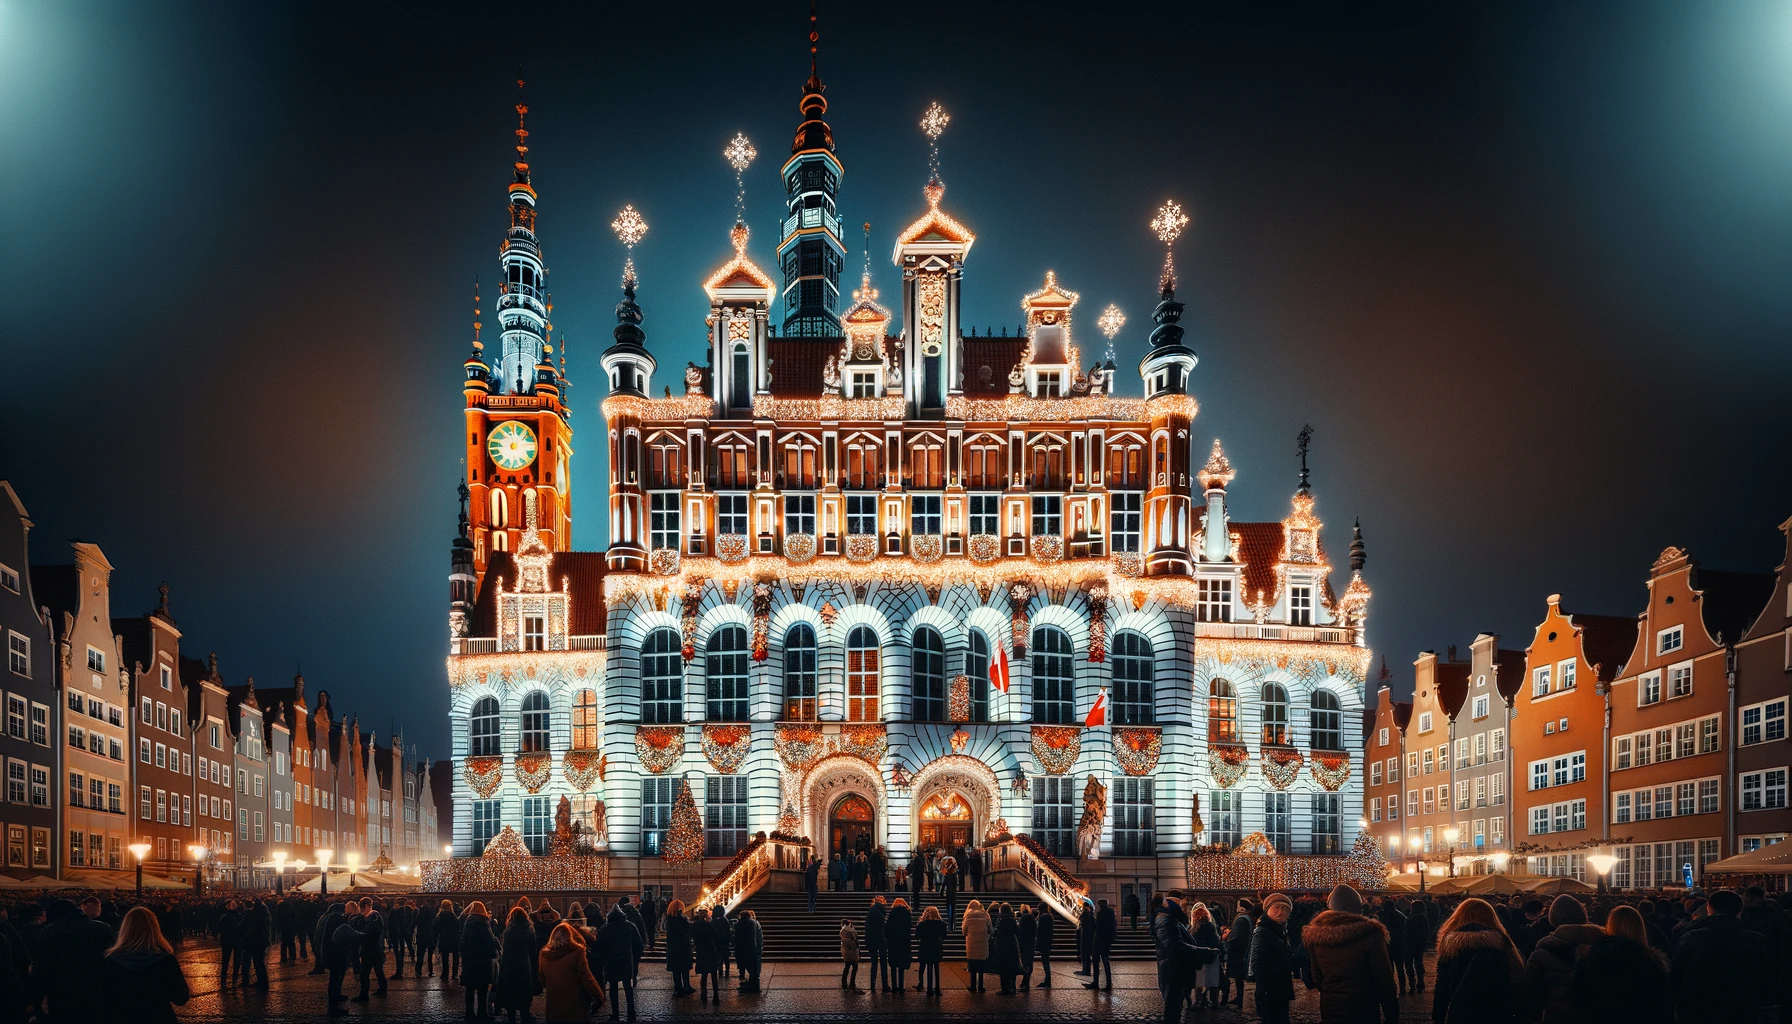 Festive Evening at Gdansk's Main Town Hall During New Year's Eve